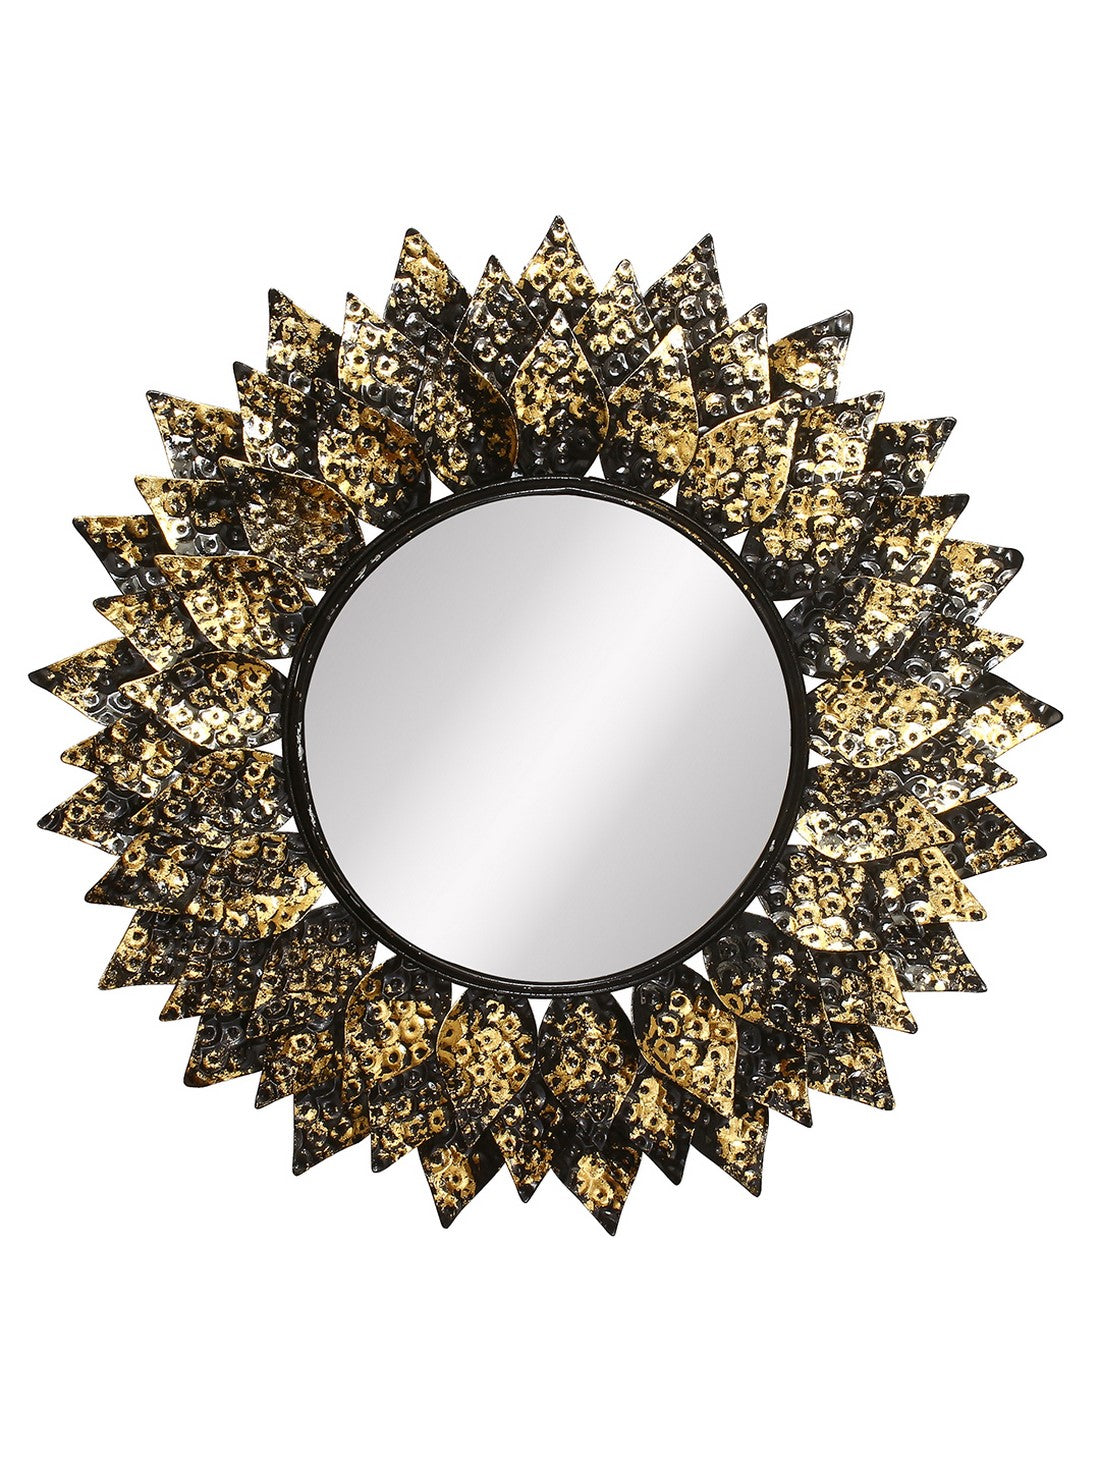 Golden and Black Decorative Metal Handcarved Wall Mirror 1